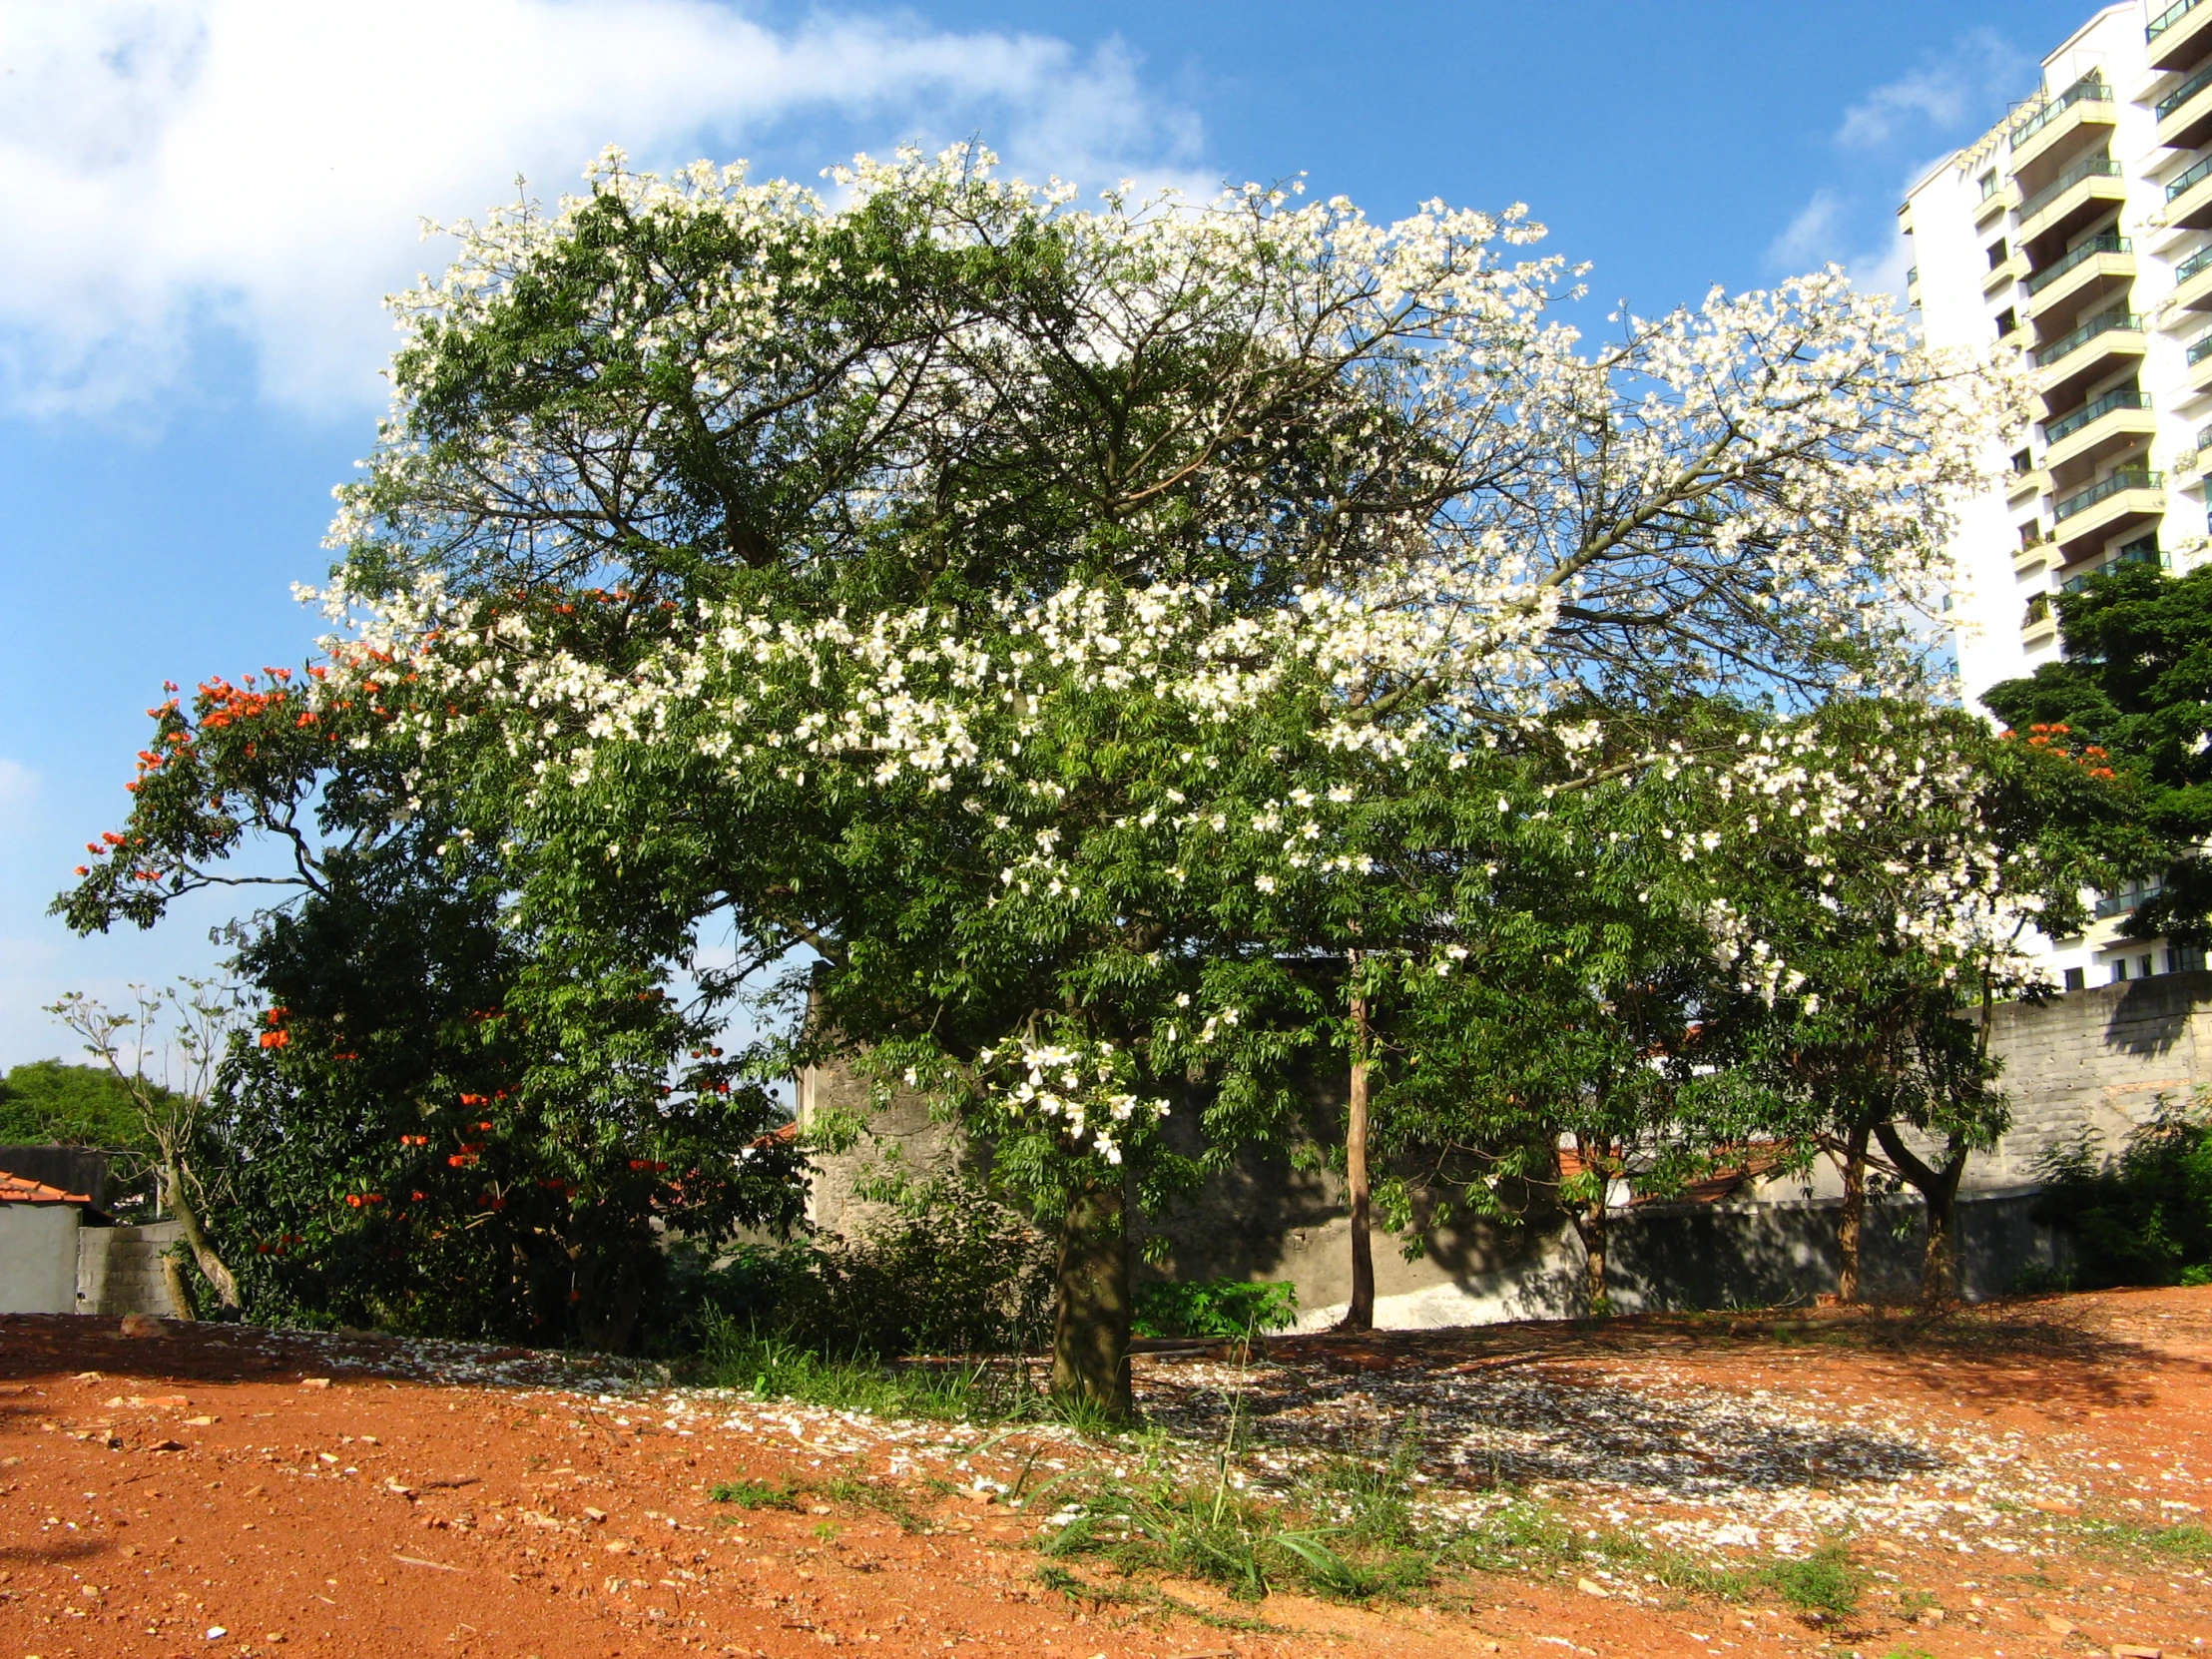 a large, blooming tree in the middle of a dirt lot